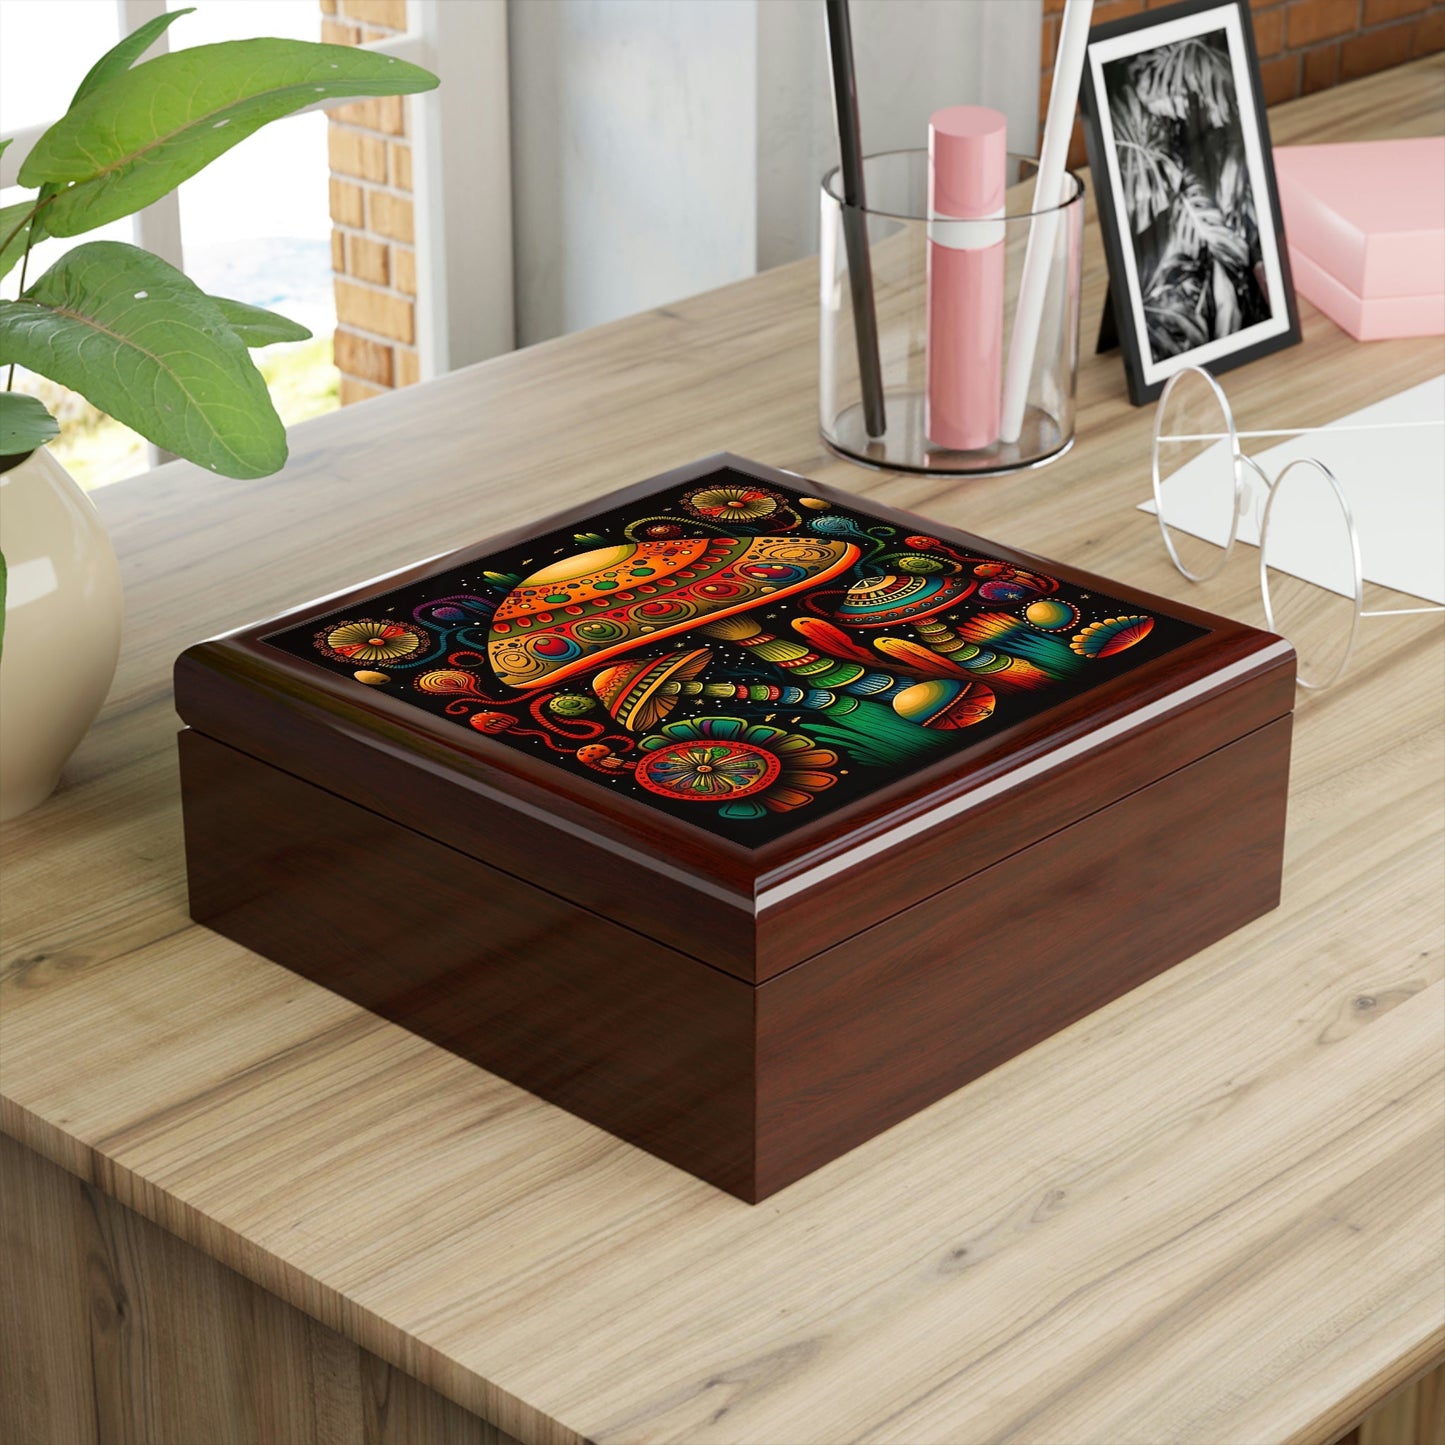 Psychedelic Mushroom Wooden Keepsake Jewelry Box with Ceramic Tile Cover